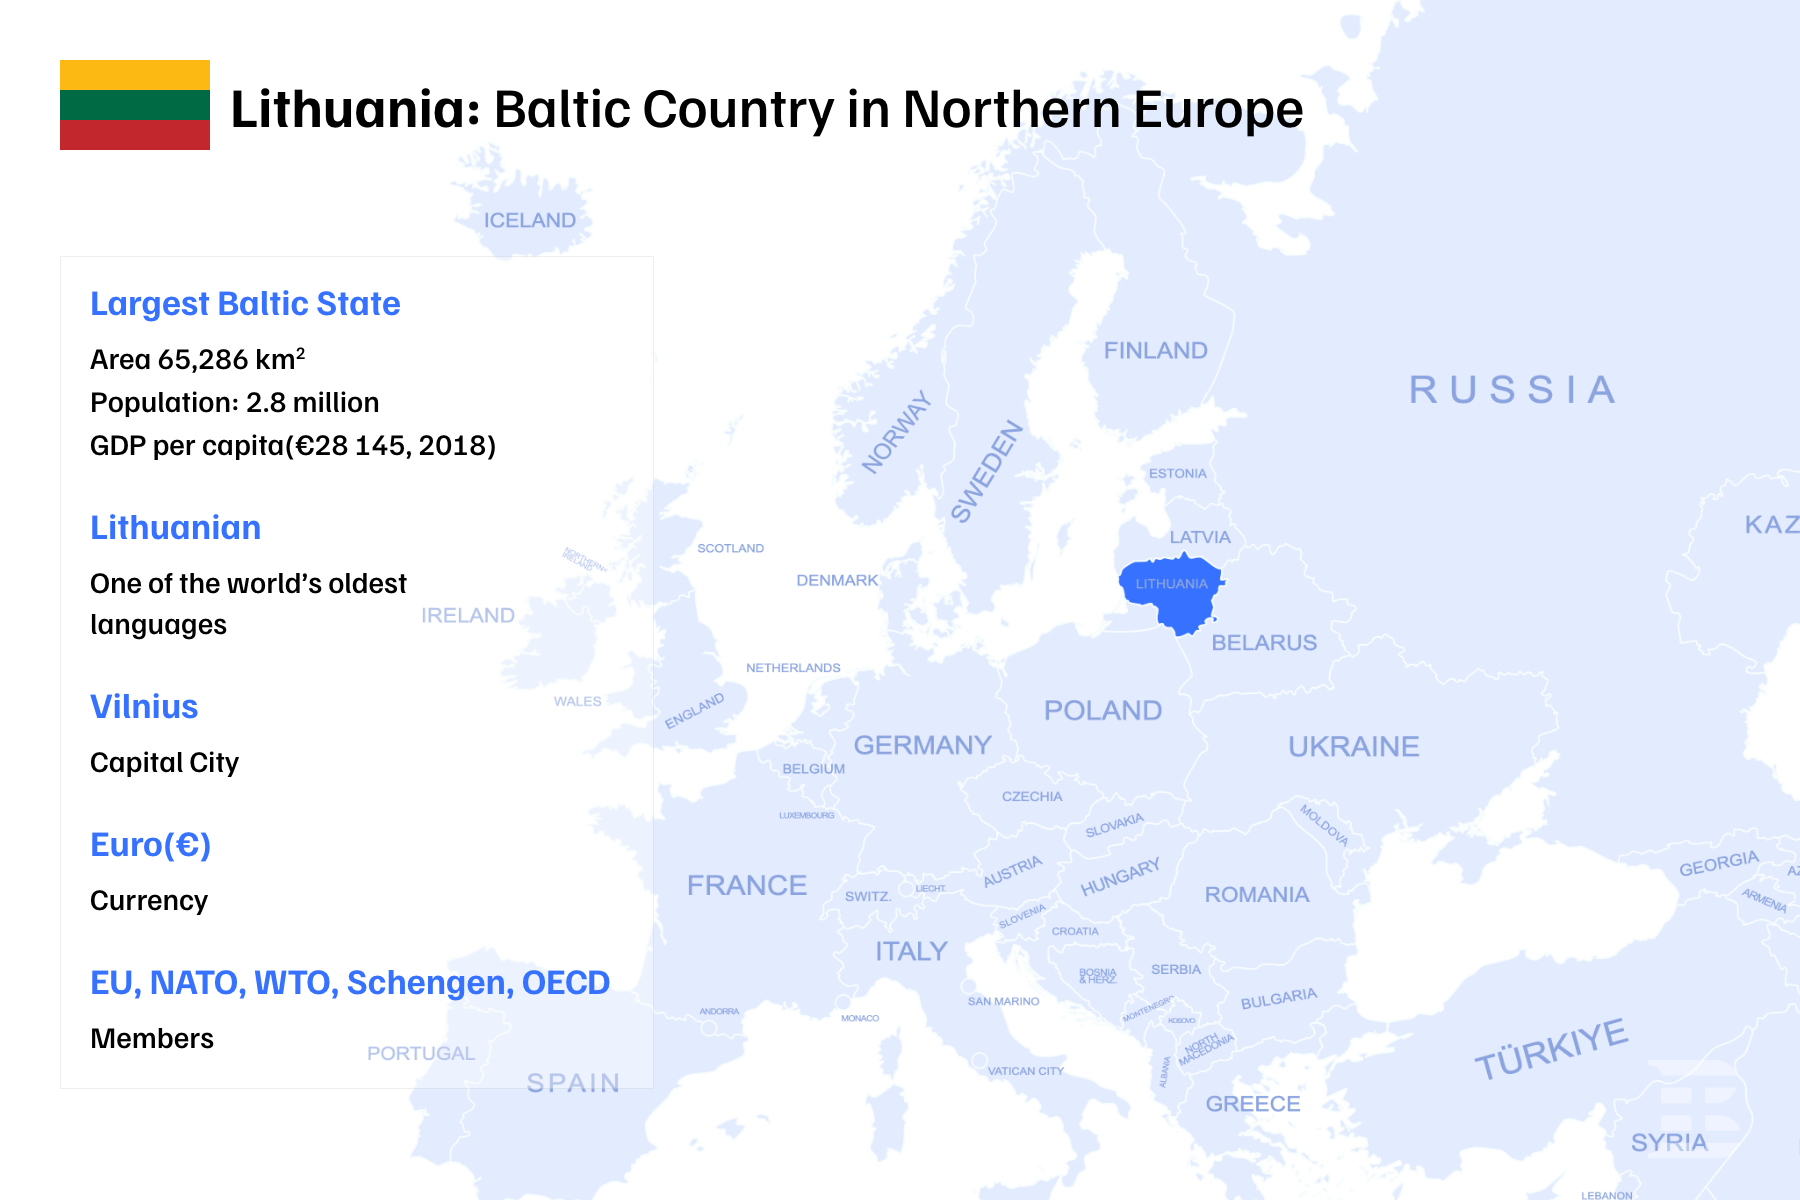 Lithuania: Baltic Country in Northern Europe